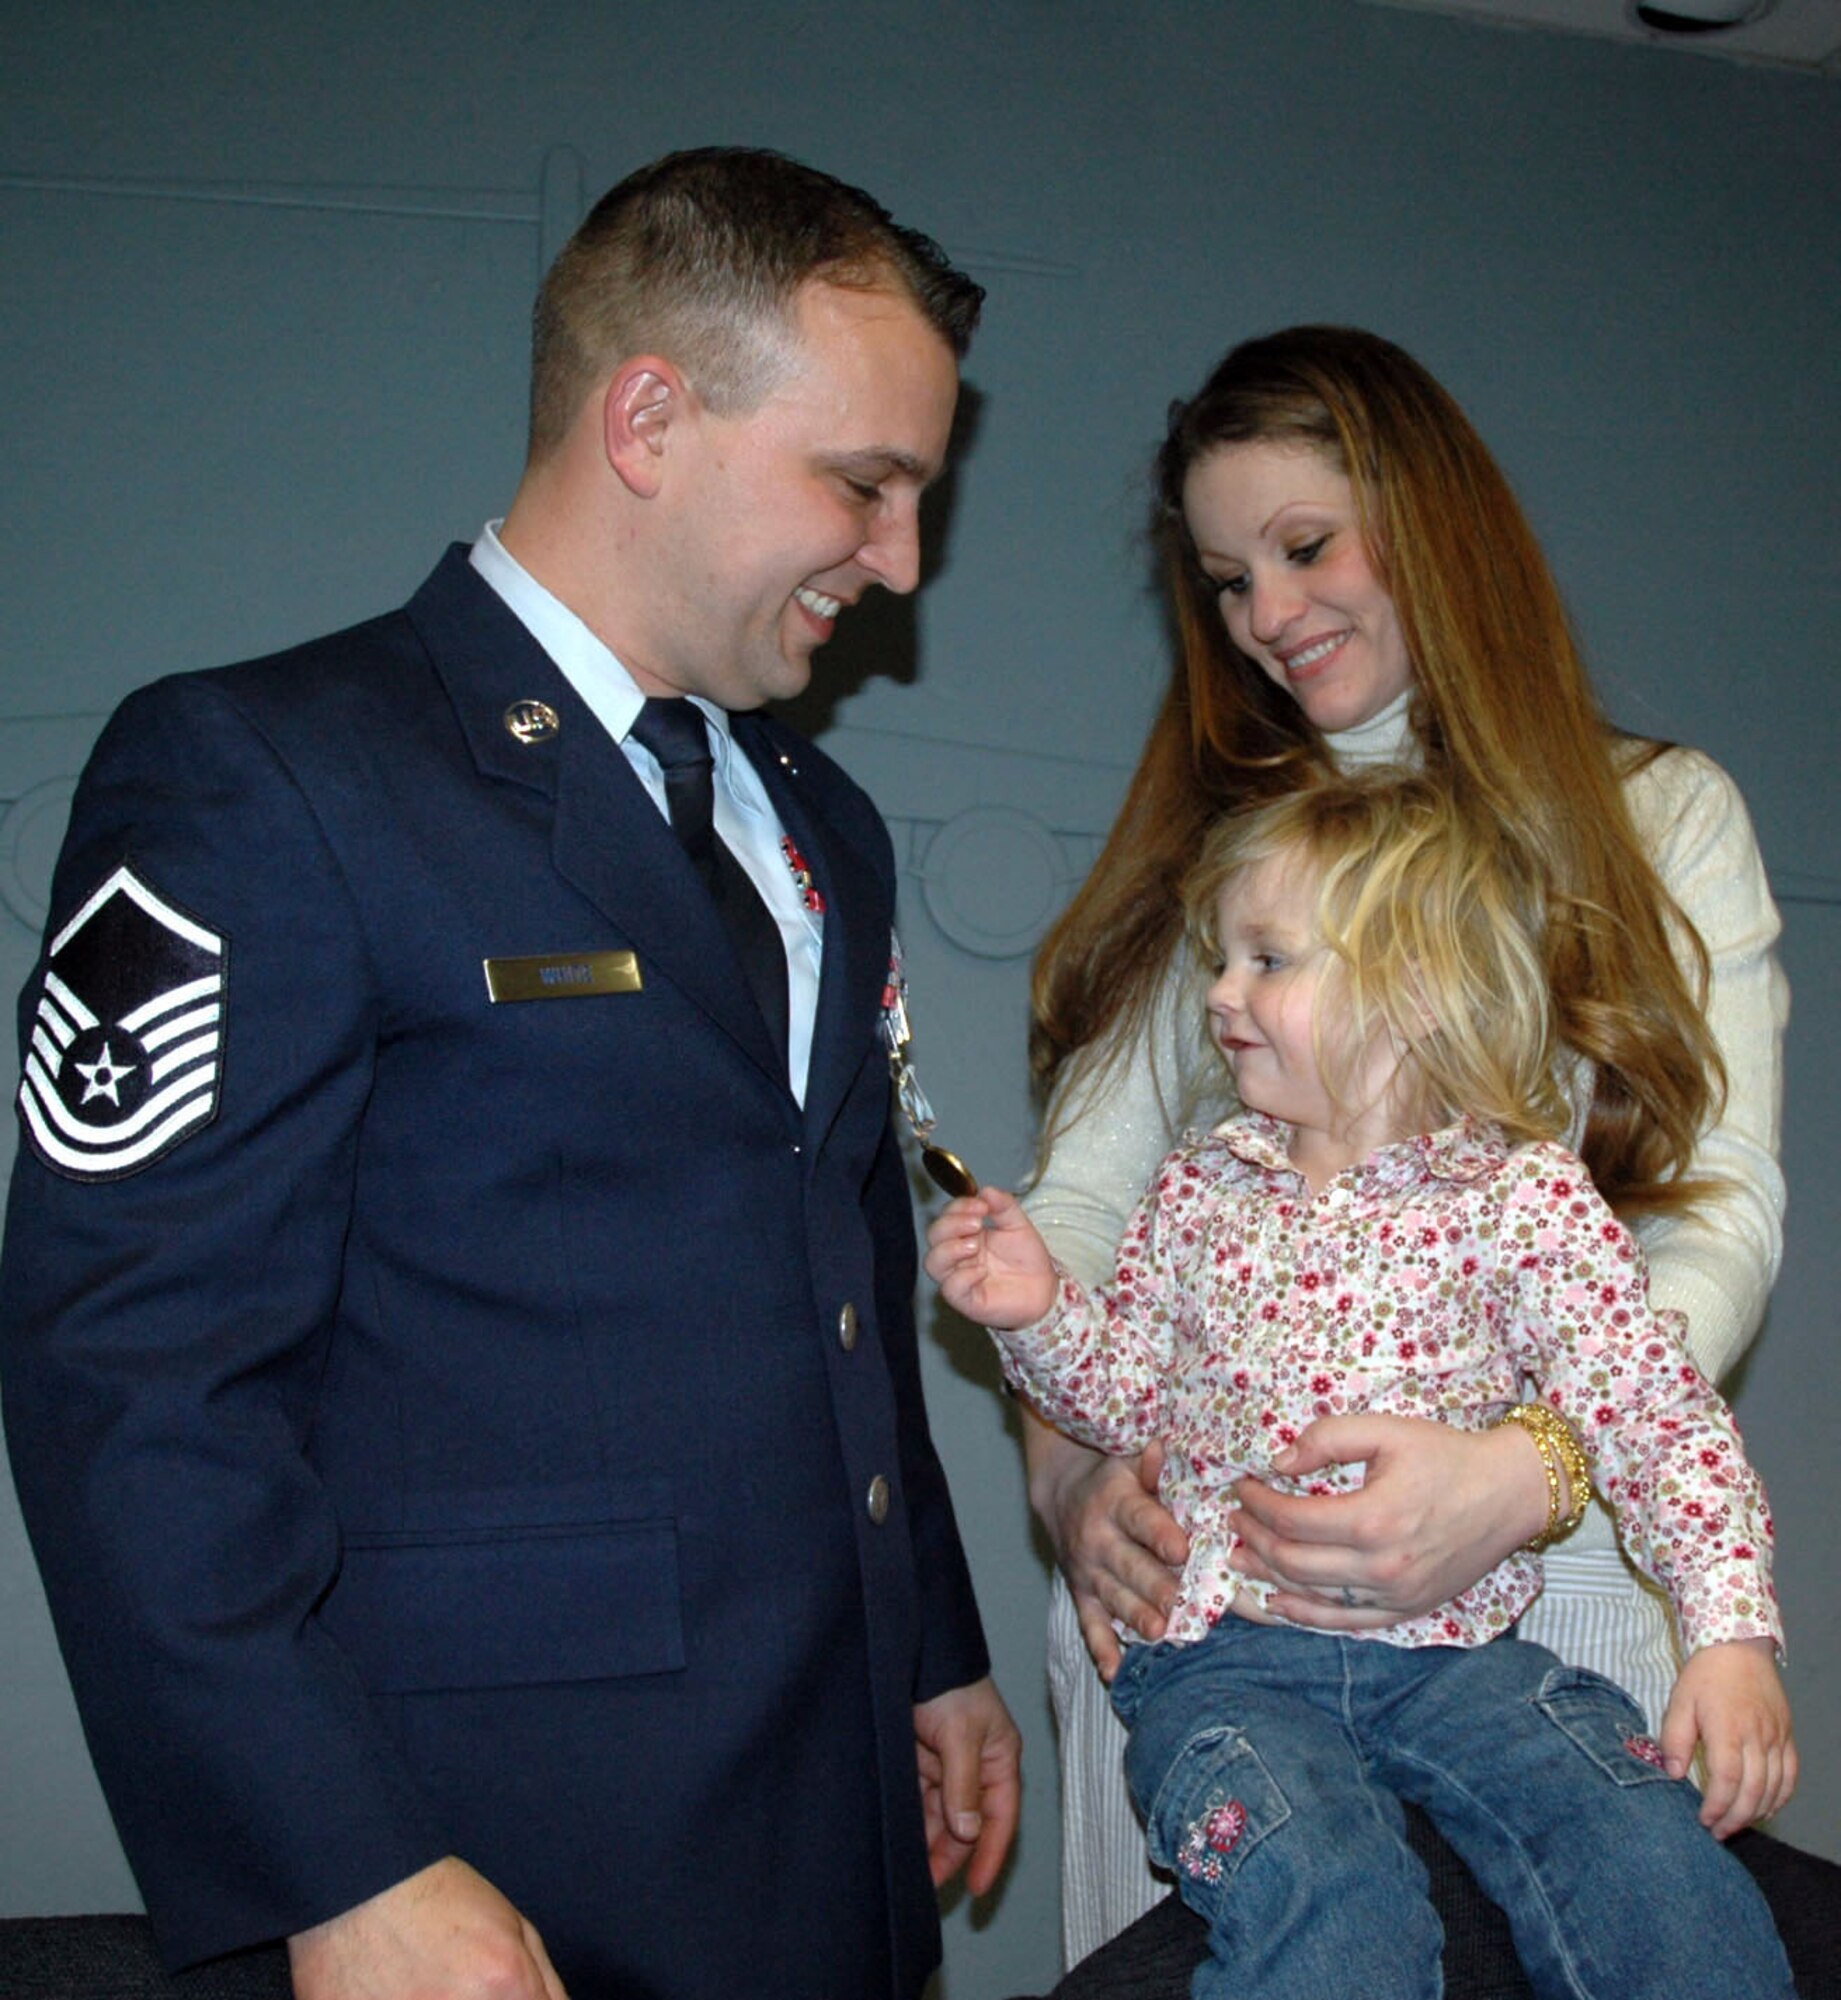 Emily Norman, held by her mother Ericka Larsen, plays with the Air Force Airman's Medal awarded to Master Sgt. Phillip White, 446th Aircraft Maintenance Squadron. Sergeant White, a Reservist, was presented the medal March 9 at McChord Air Force Base, Wash., for heroic actions.  In July 2006, Sergeant White saved Emily and her sister Allison from a burning car following an auto accident on state Route 101. (U.S. Air Force photo/ Capt. Sabra Brown)